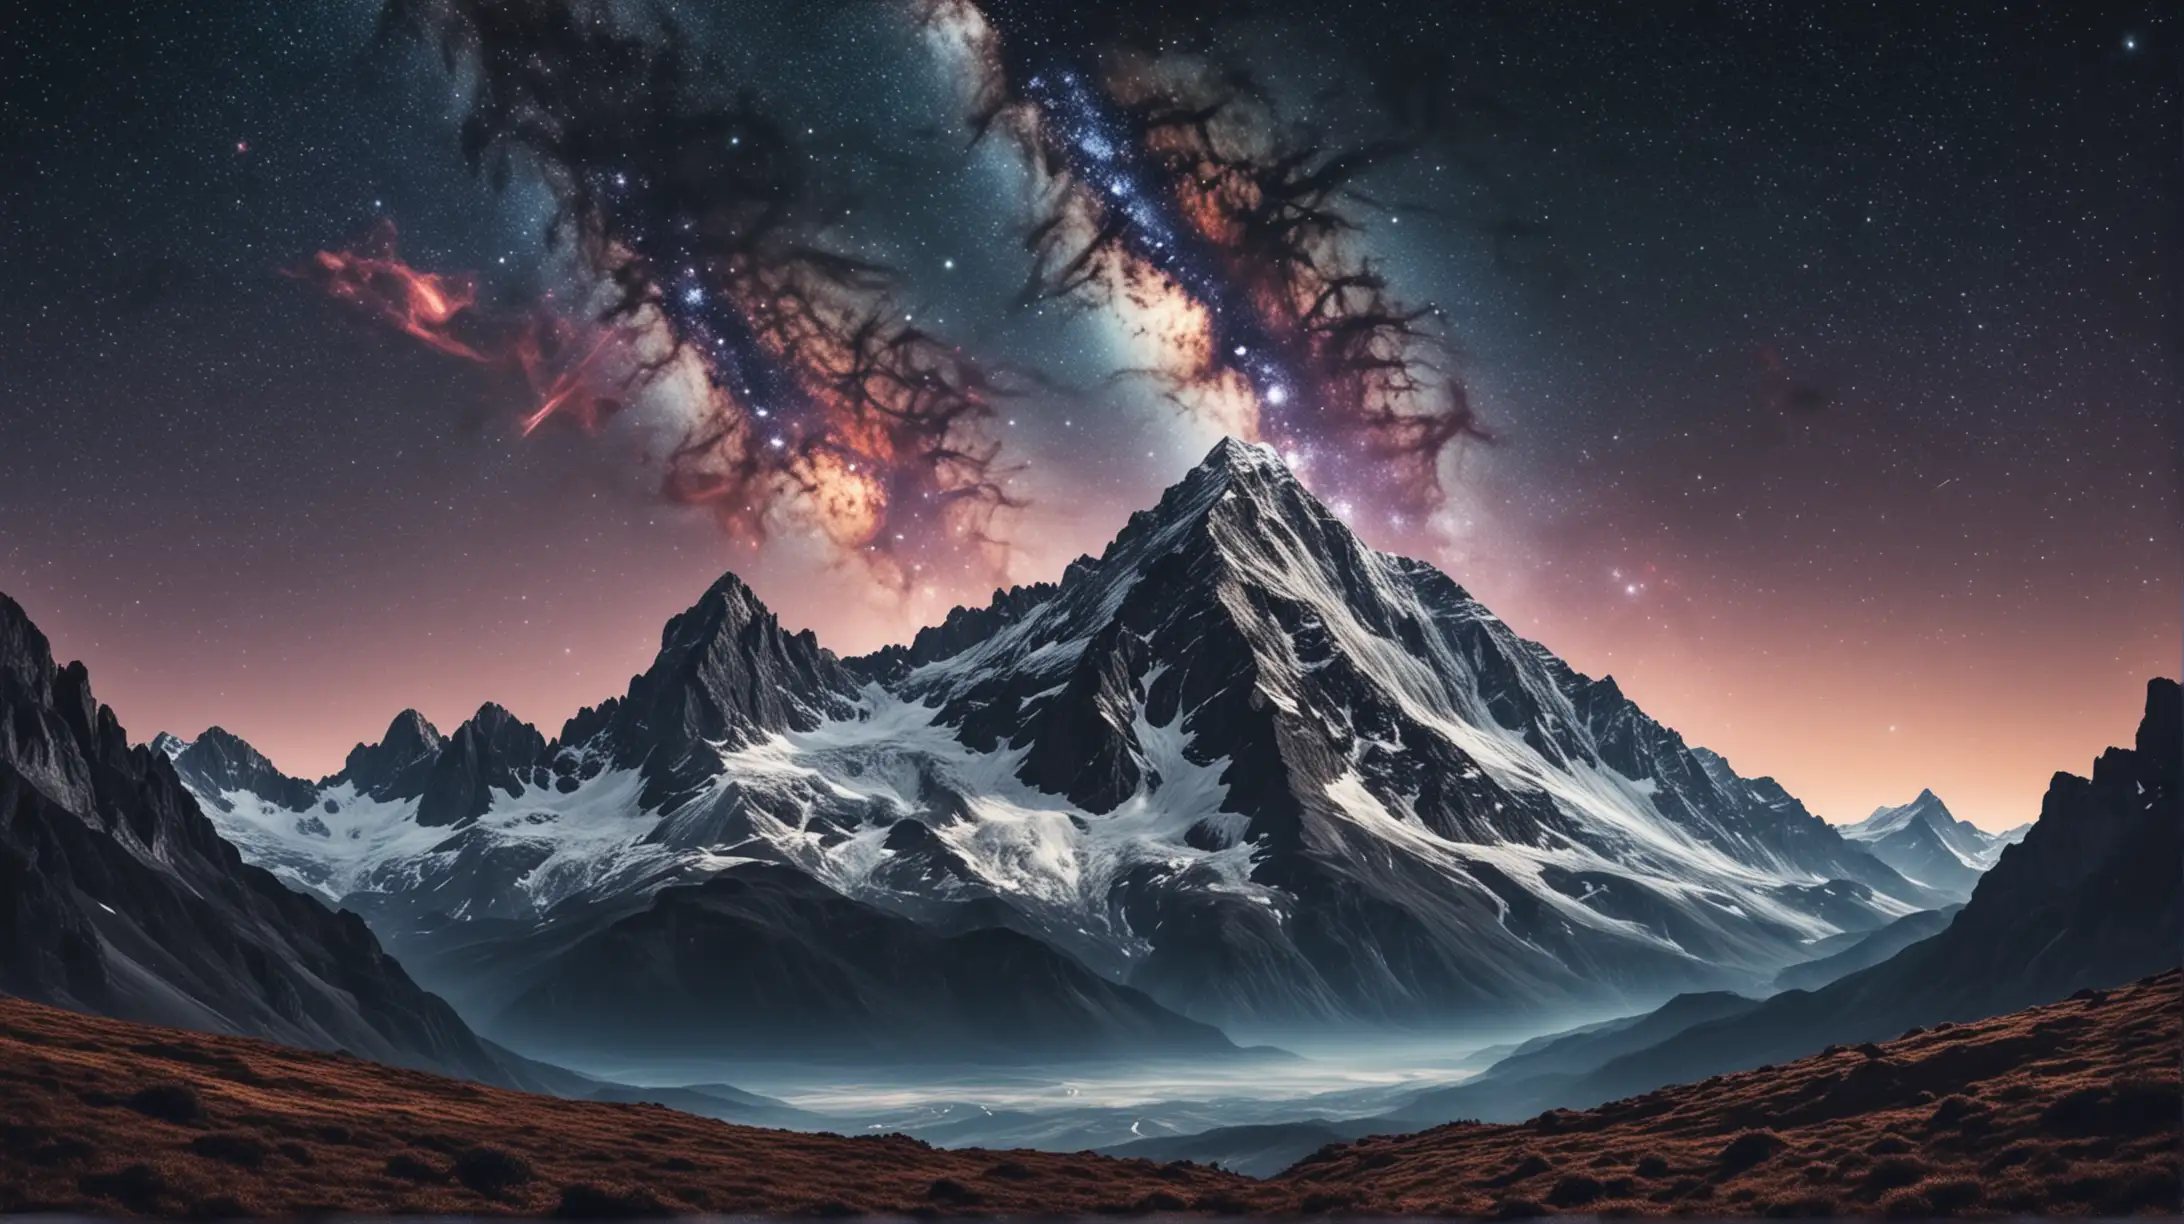 Create an image that shows outerspace with a mountained being pushed